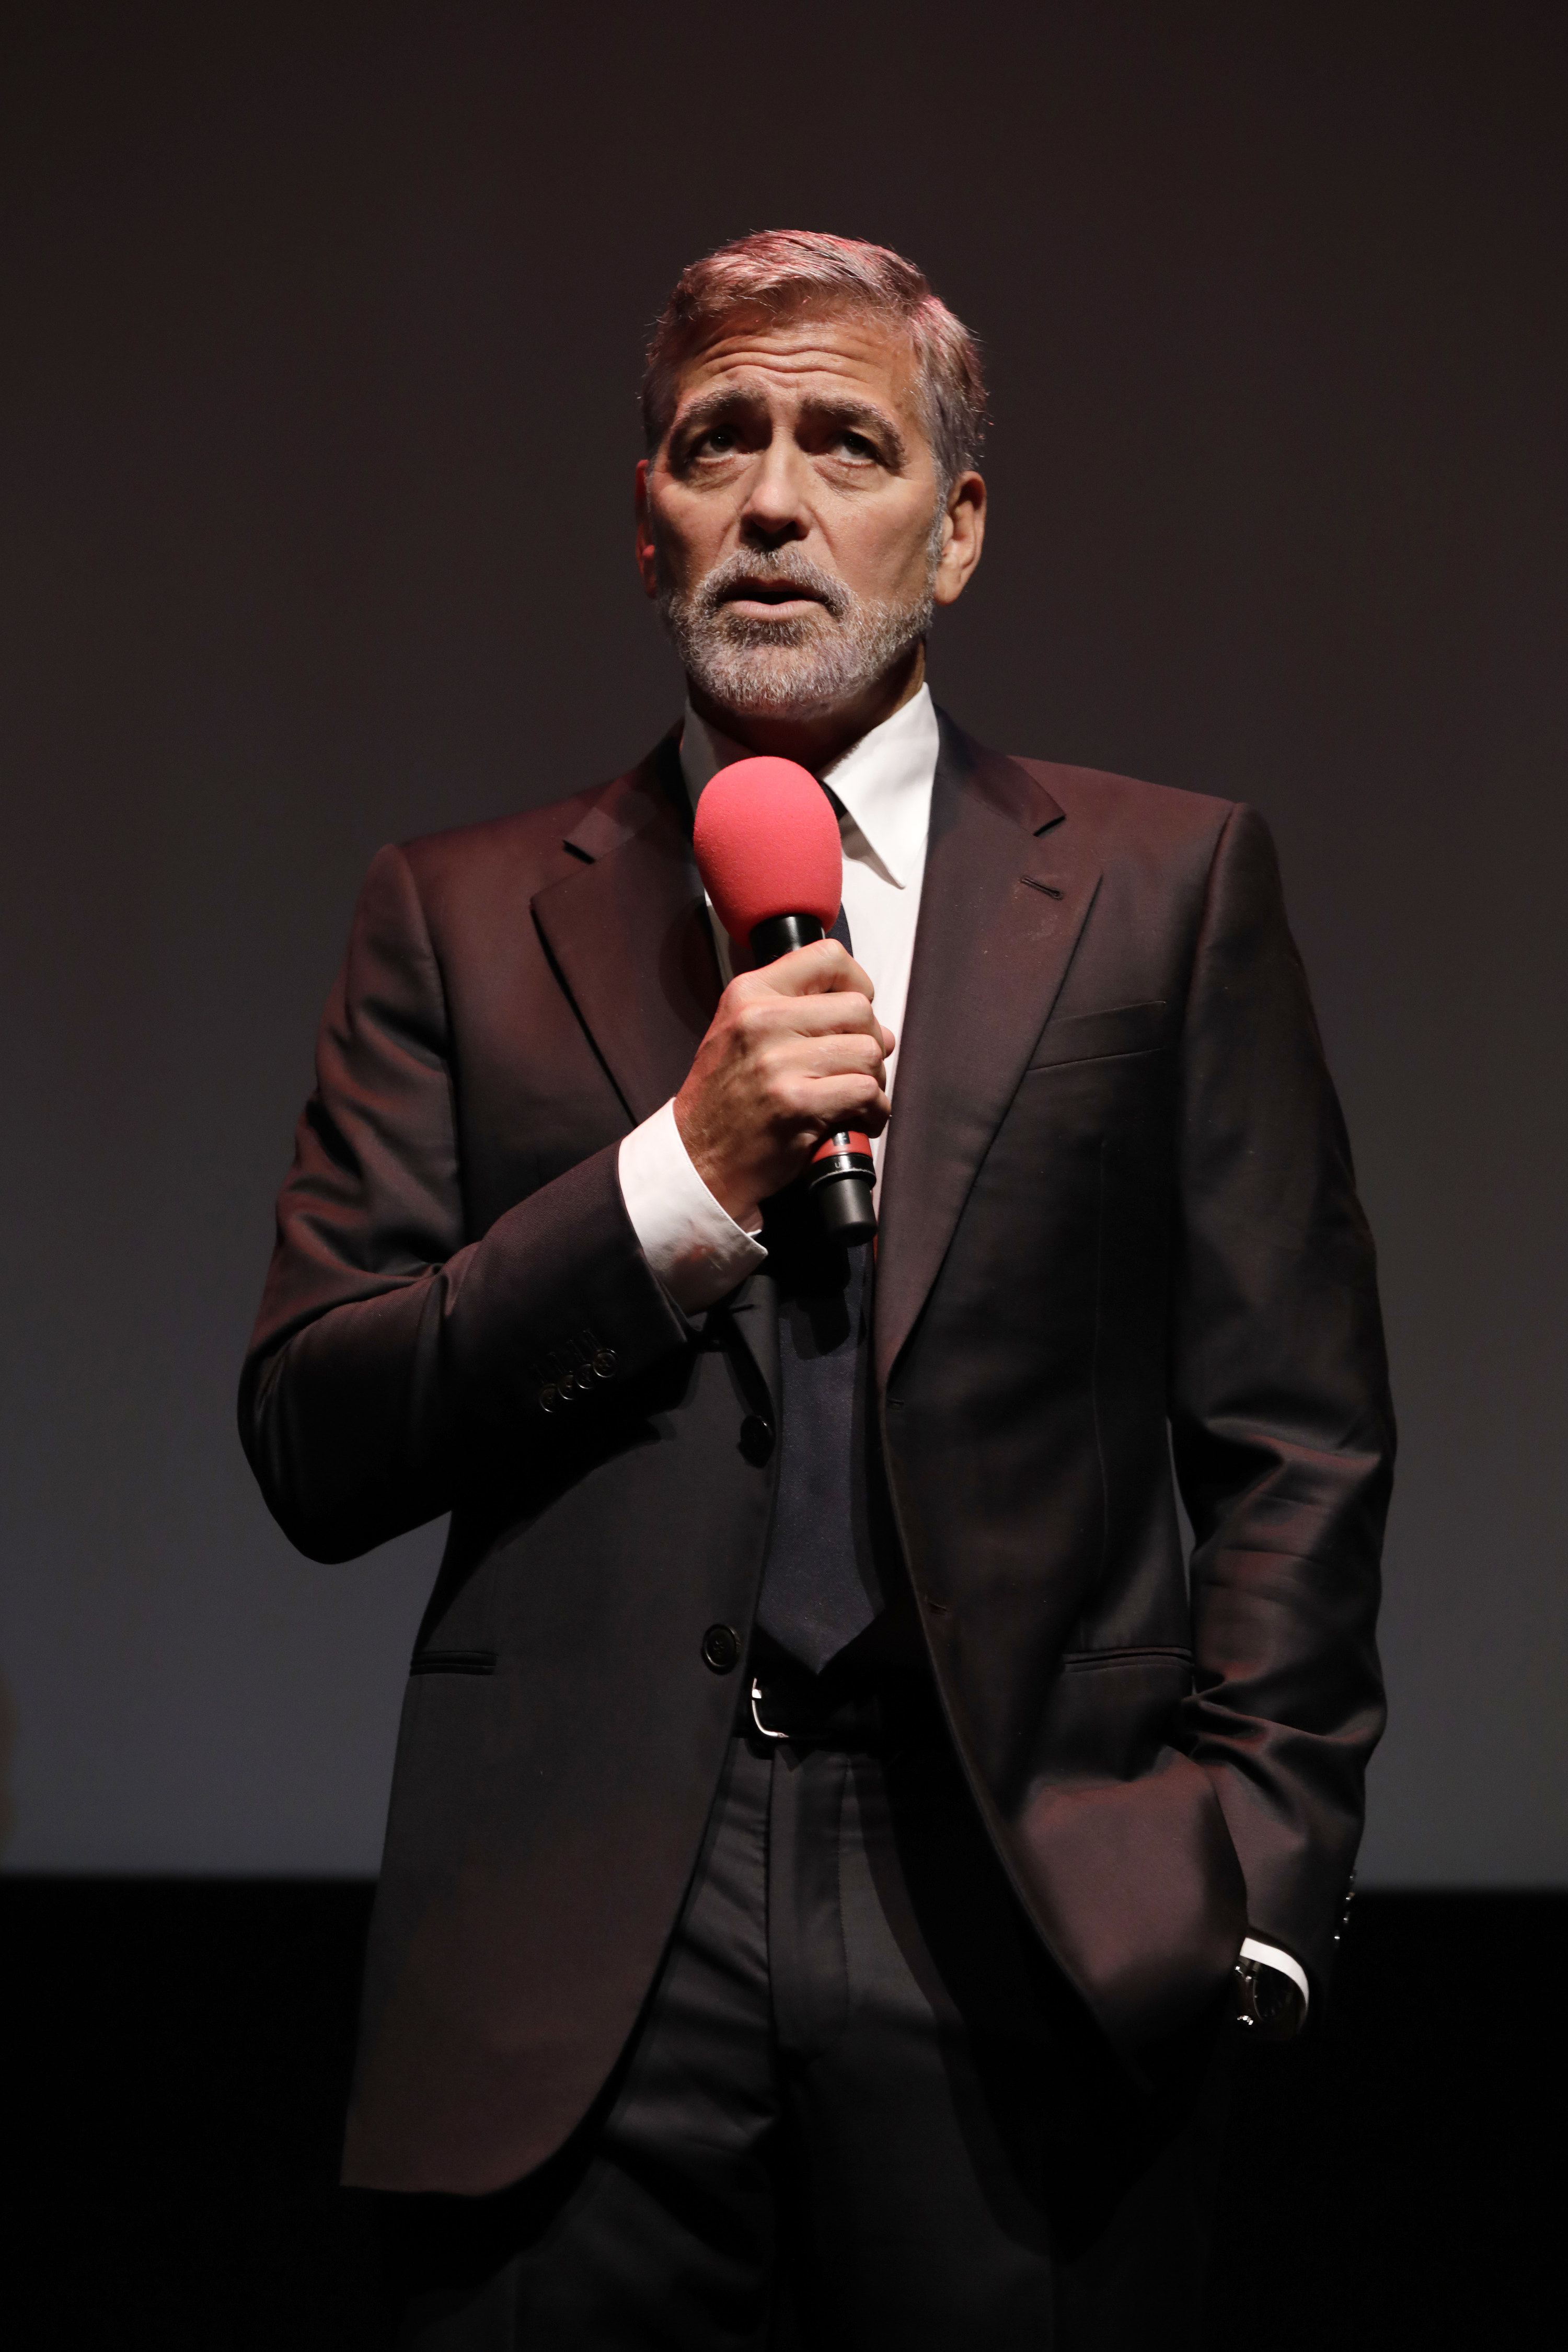 Clooney speaks into a red microphone